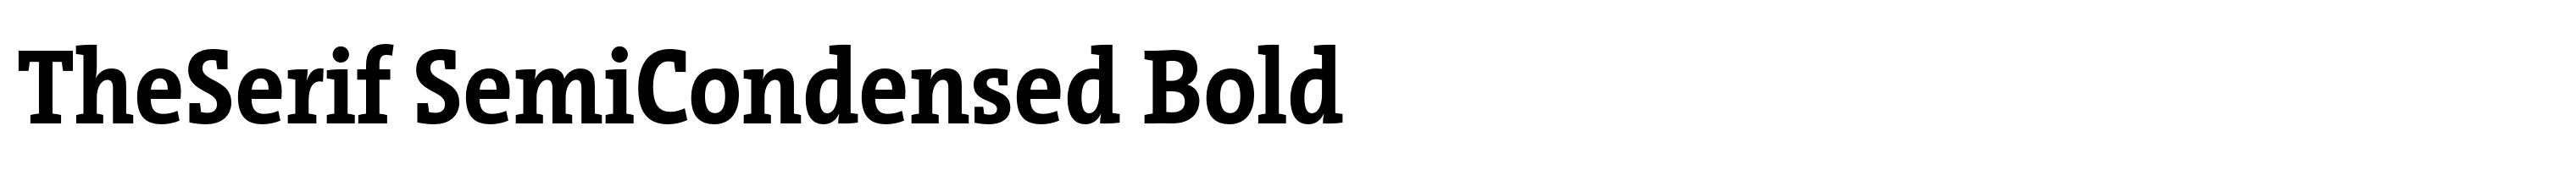 TheSerif SemiCondensed Bold